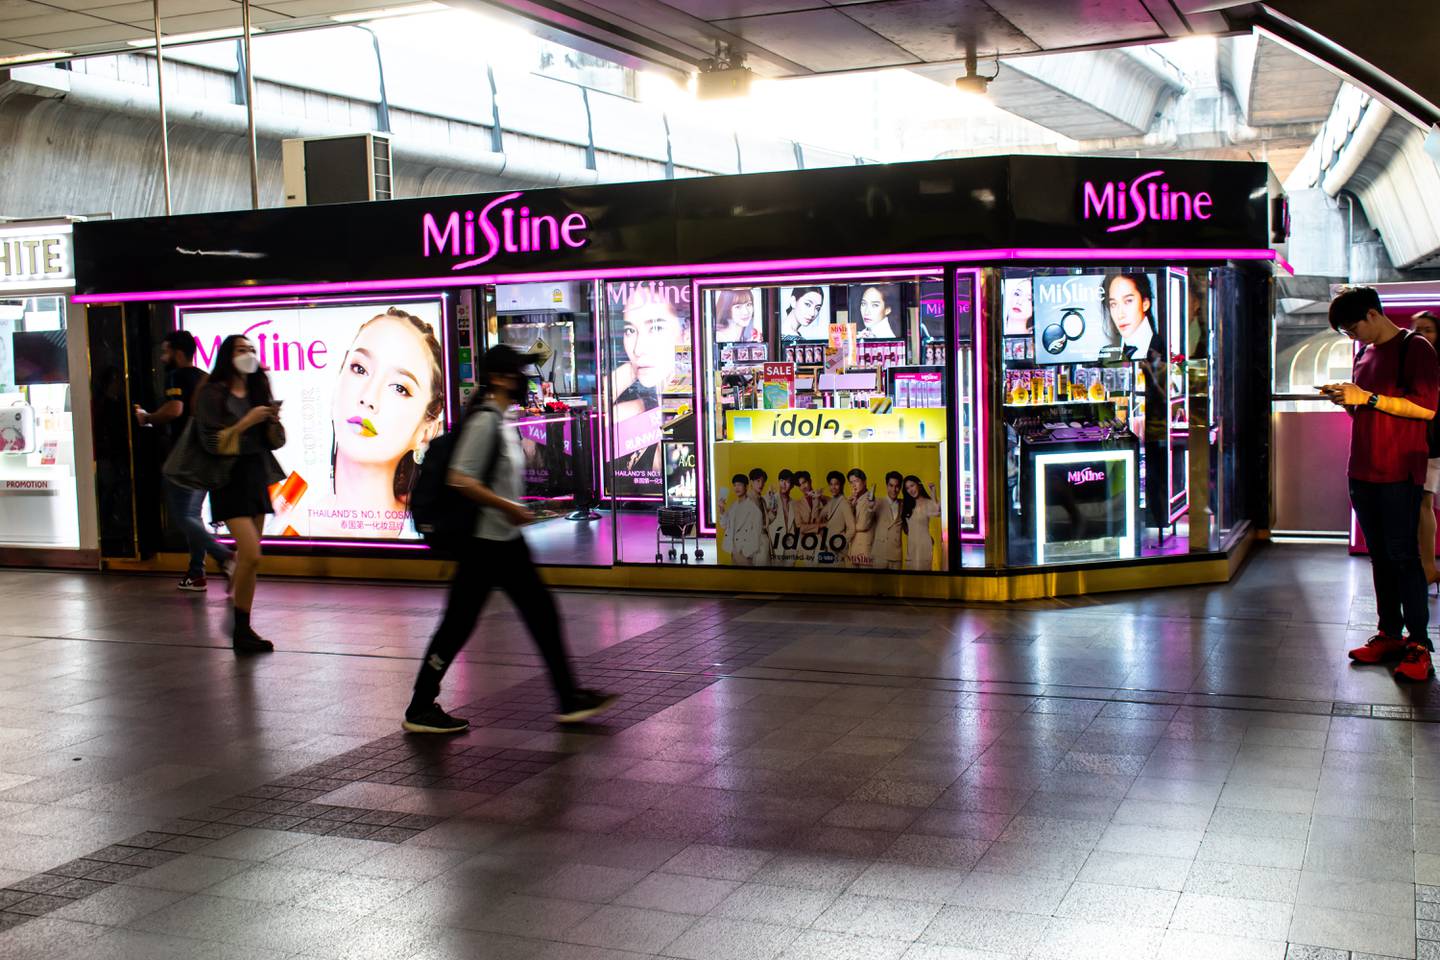 The exterior of a Mistine store in Bangkok.